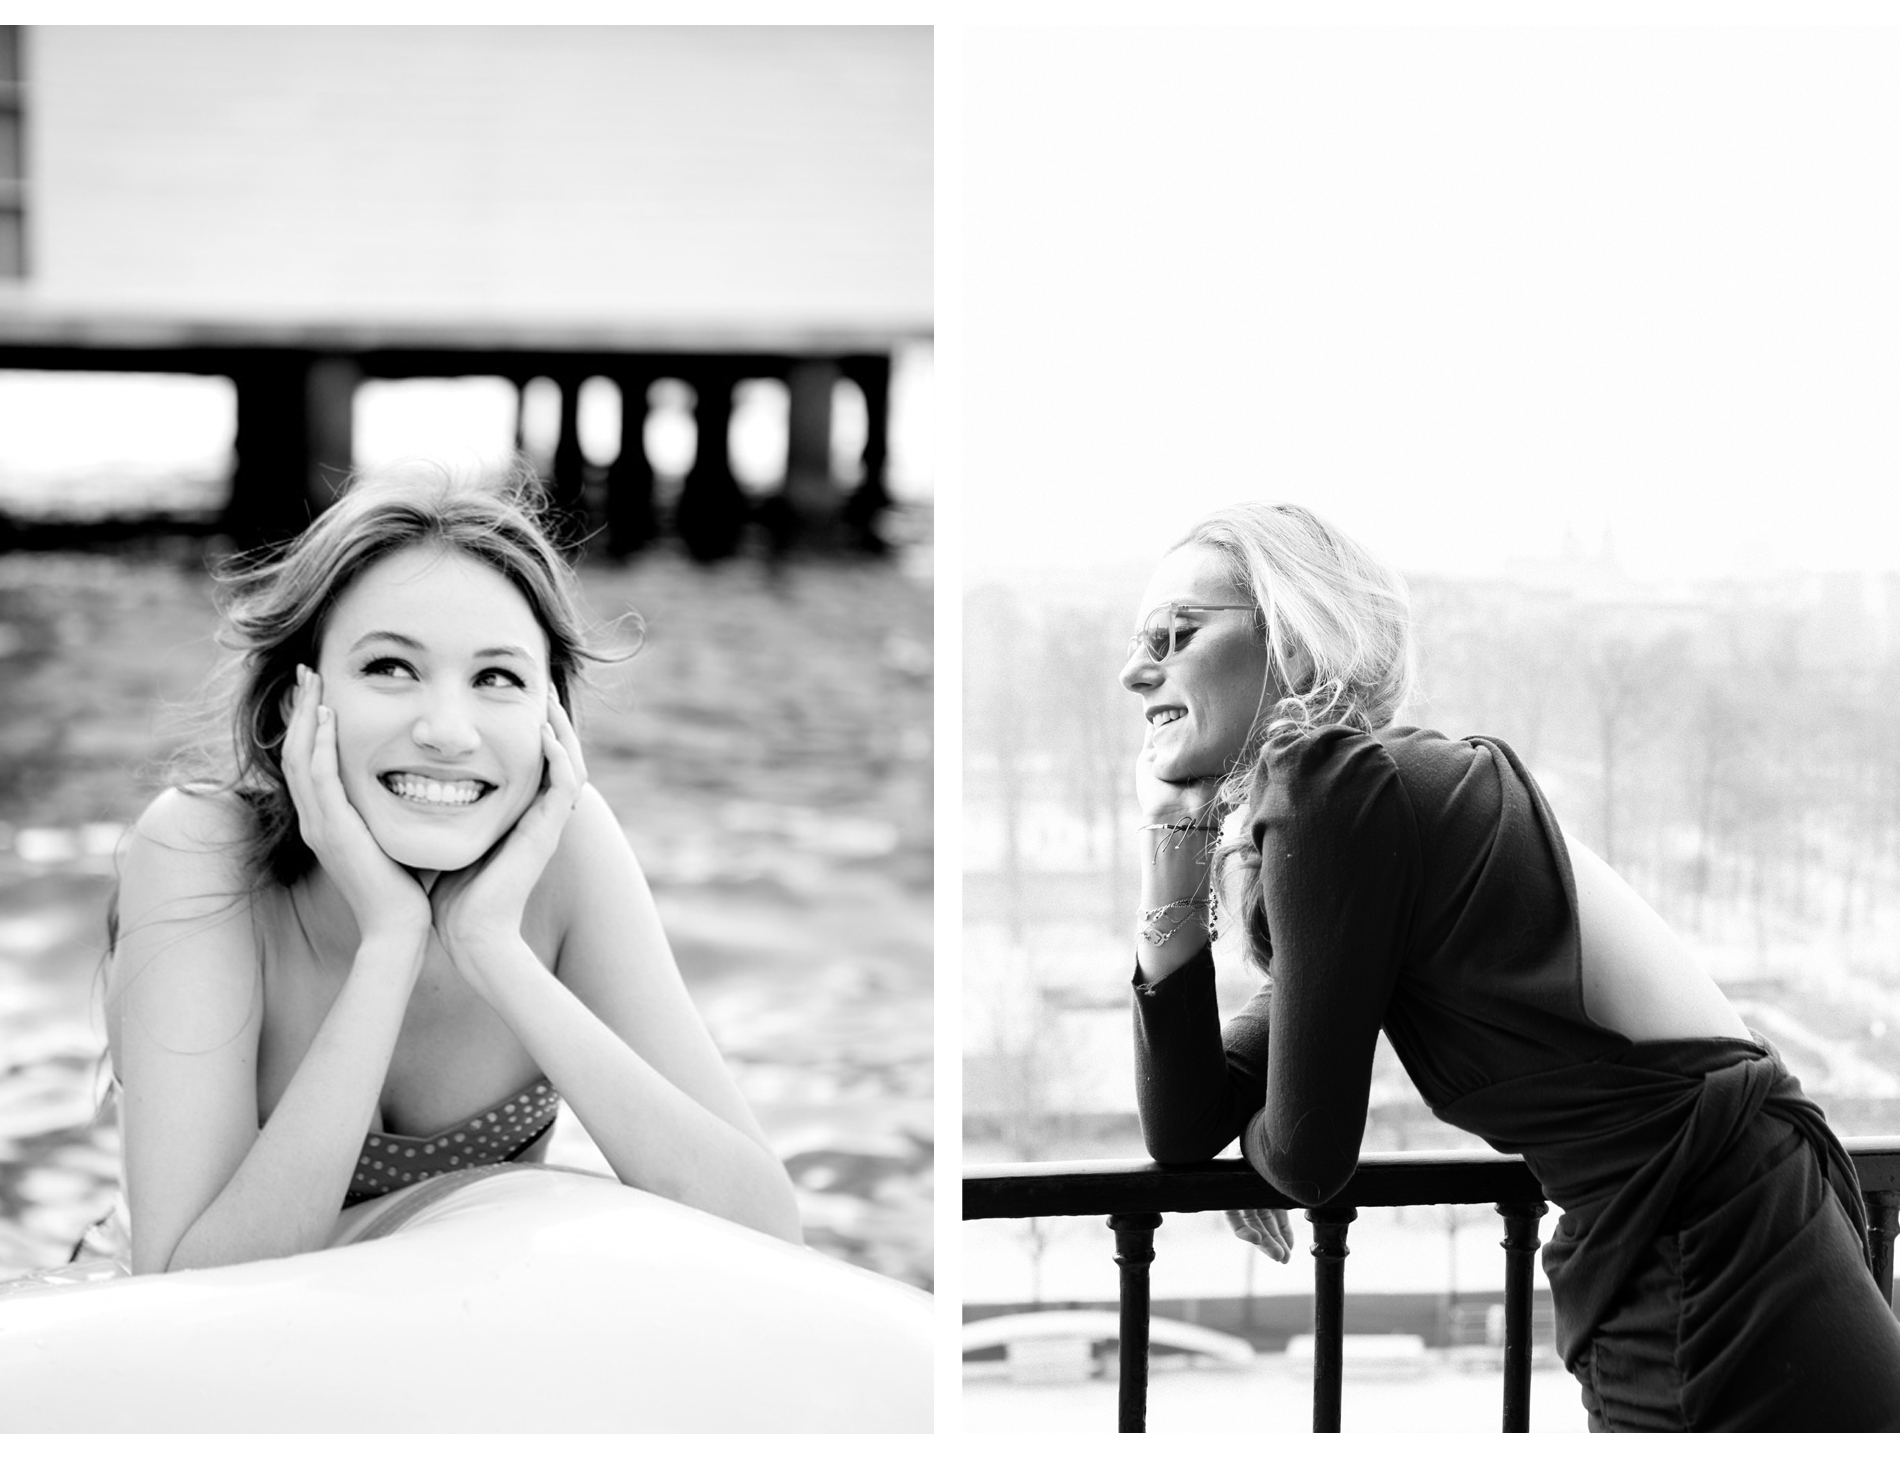 carla coulson, portrait photography, emotion in portraiture, mastering manual photography, black and white photography,